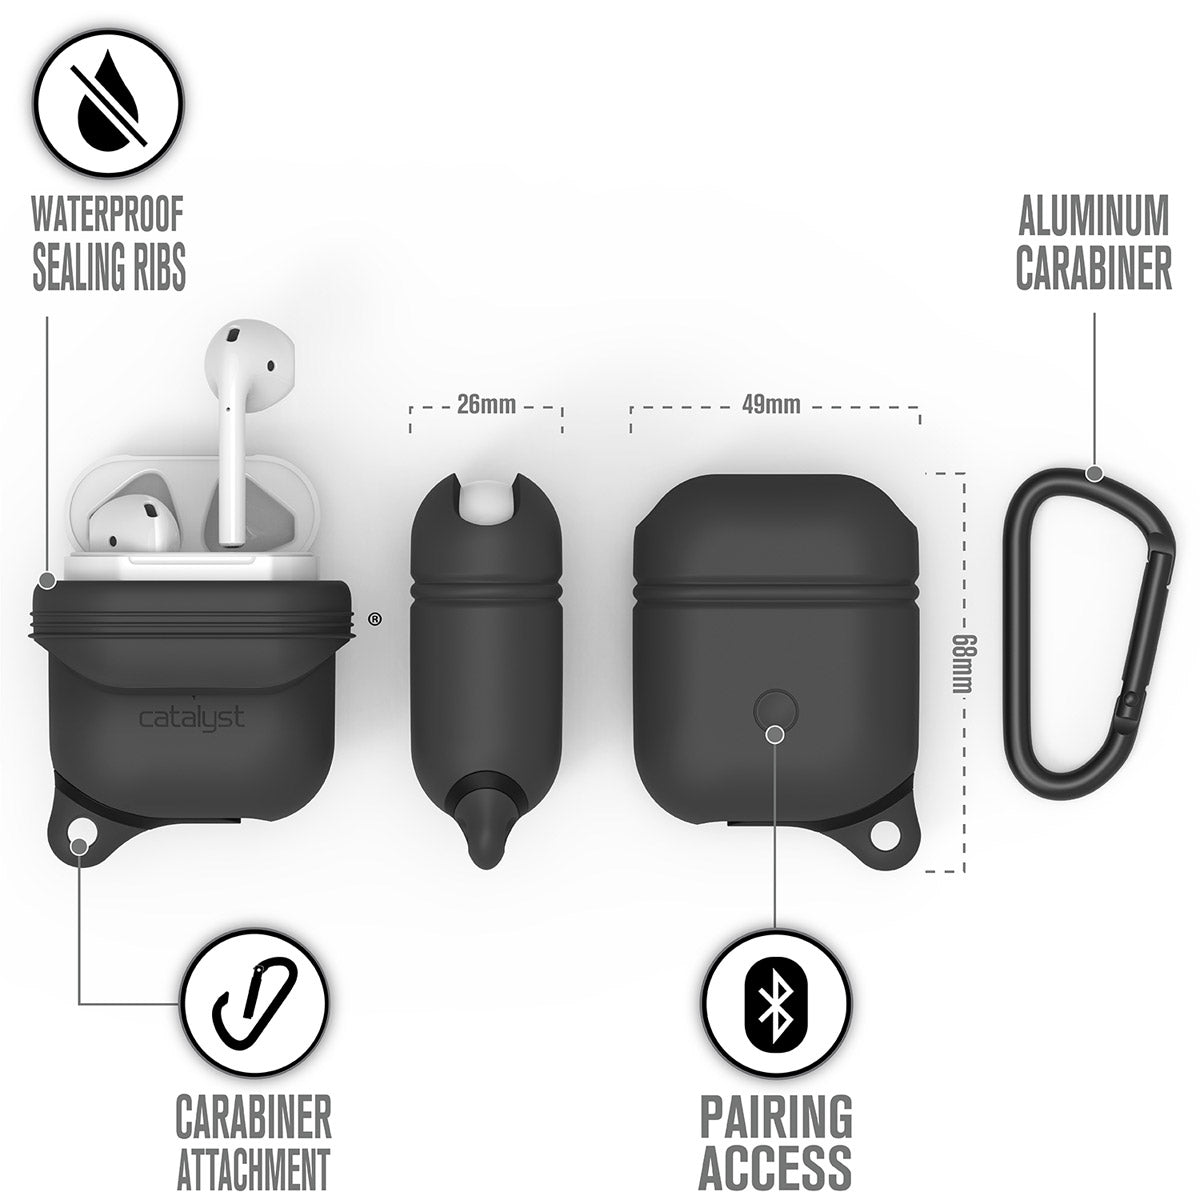 Catalyst airpods gen2/1 waterproof case + carabiner showing the case dimension and features in slate gray text reads waterproof sealing ribs aluminum carabiner pairing access carabiner attachment